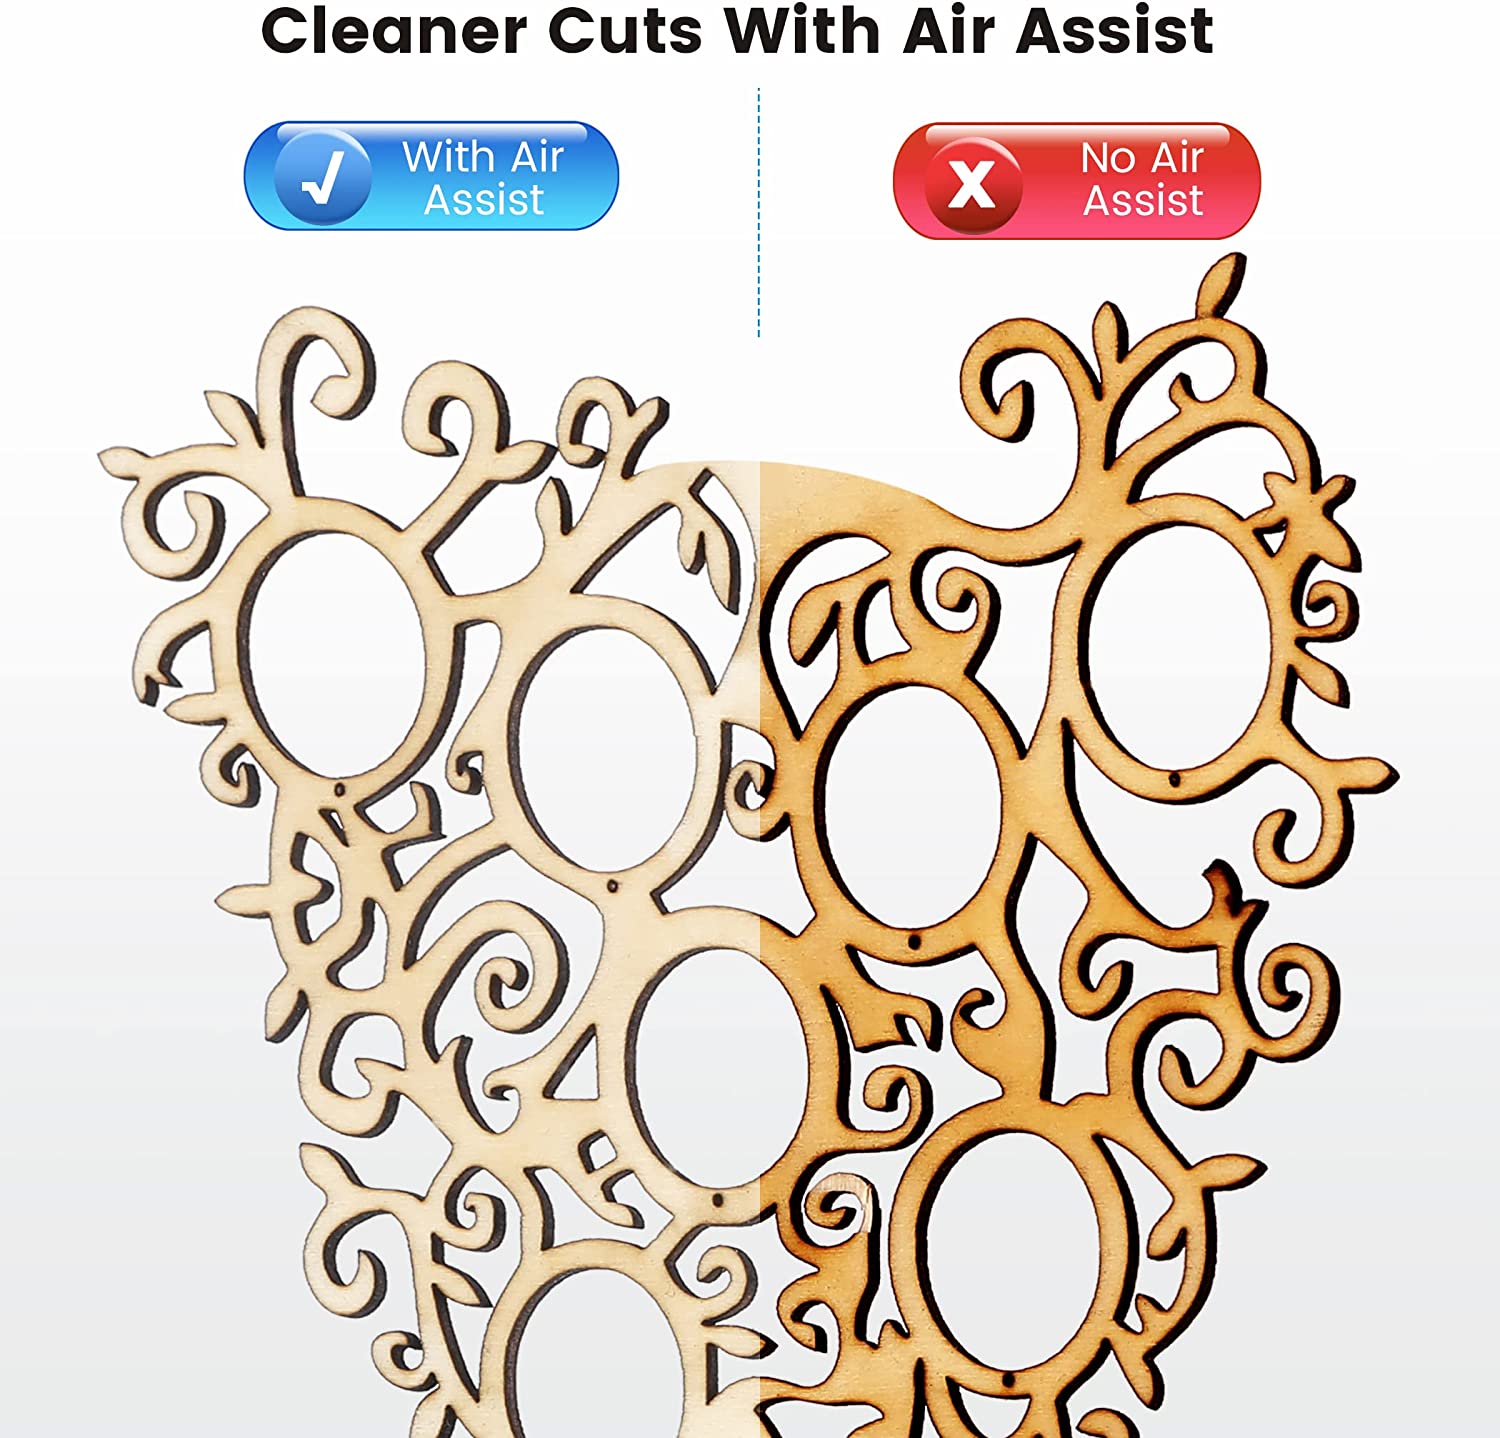 cleaner cuts with comgrow air assistant